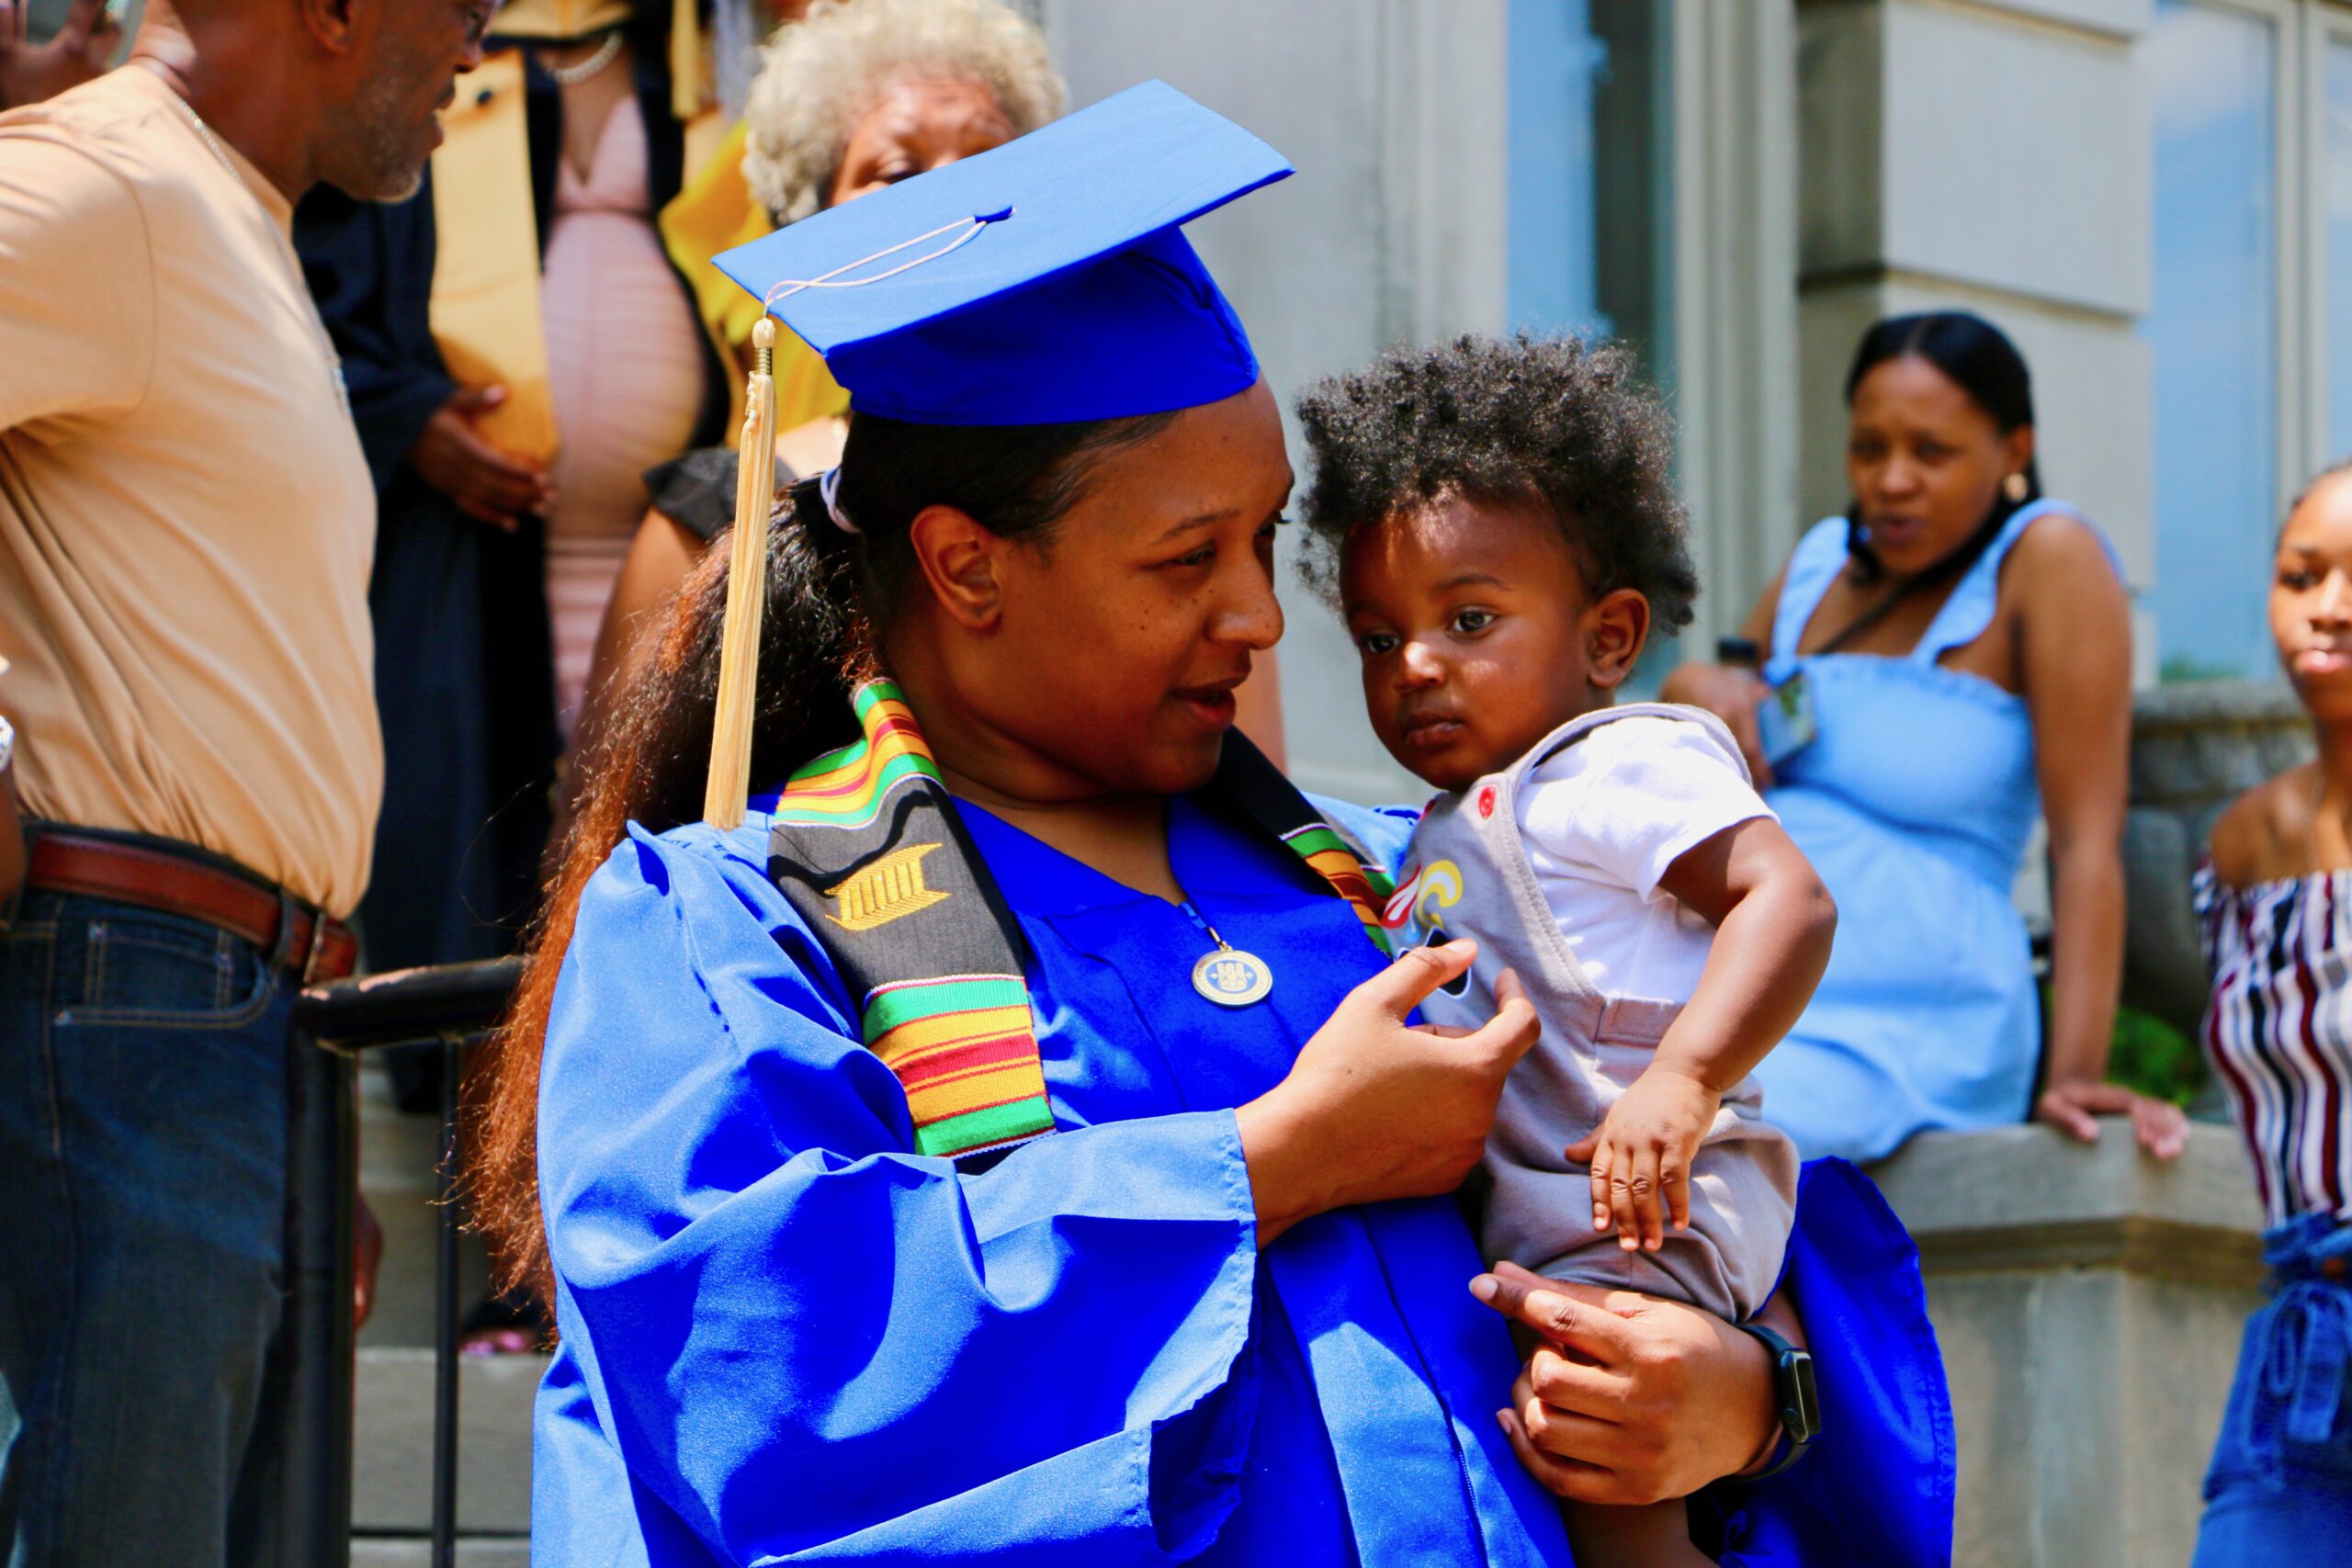 Spalding bachelor's graduate holding her young child